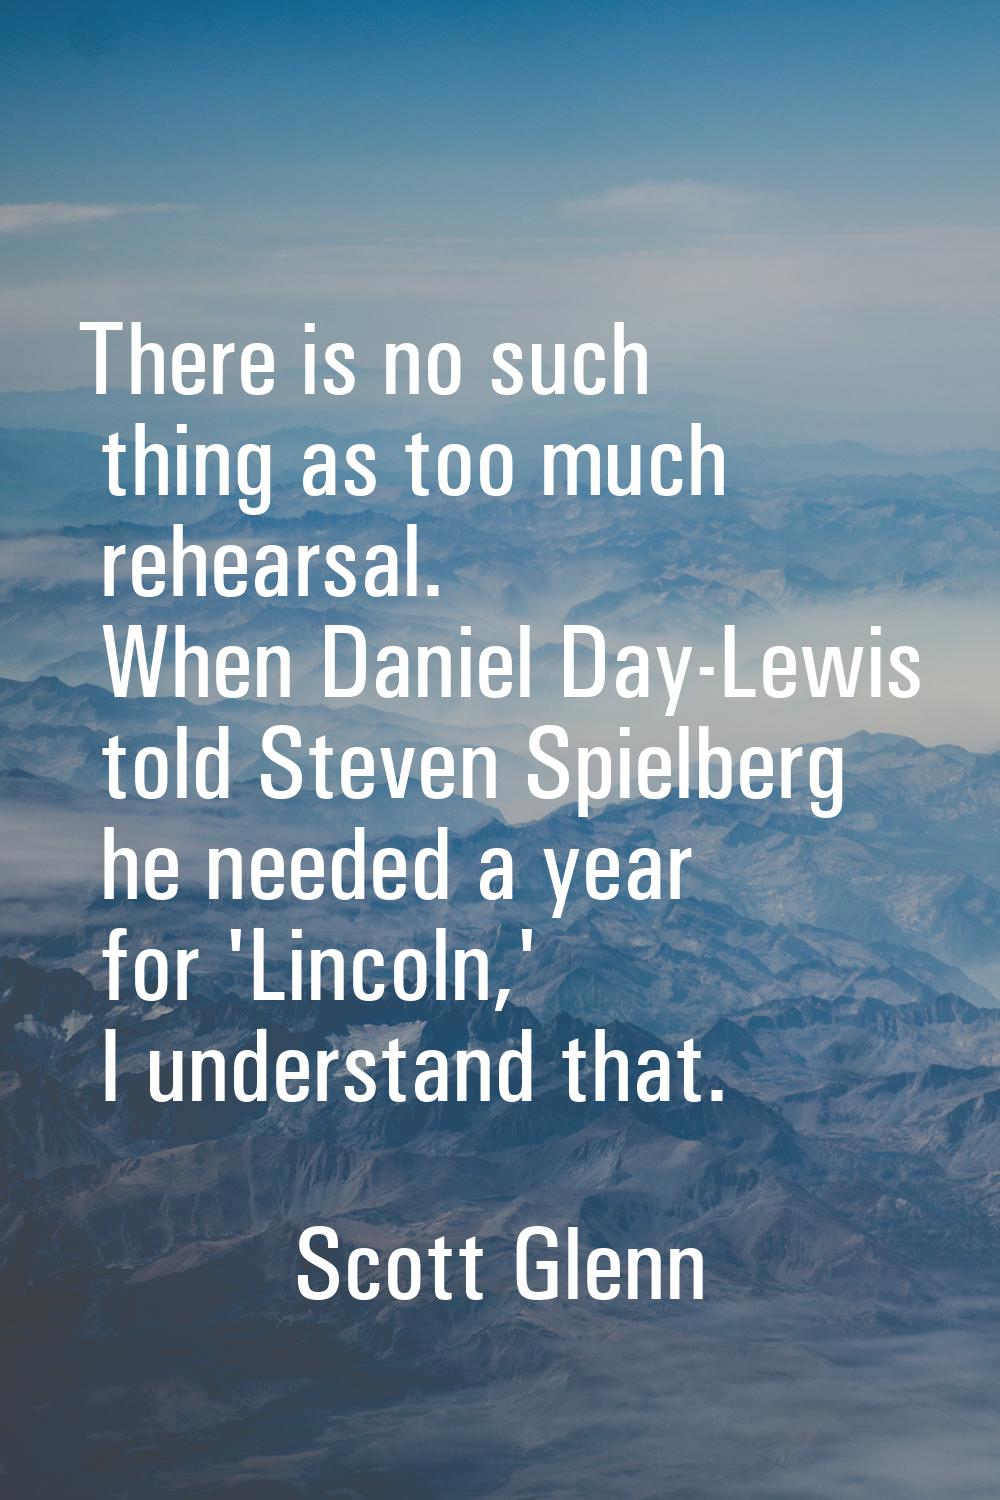 There is no such thing as too much rehearsal. When Daniel Day-Lewis told Steven Spielberg he needed